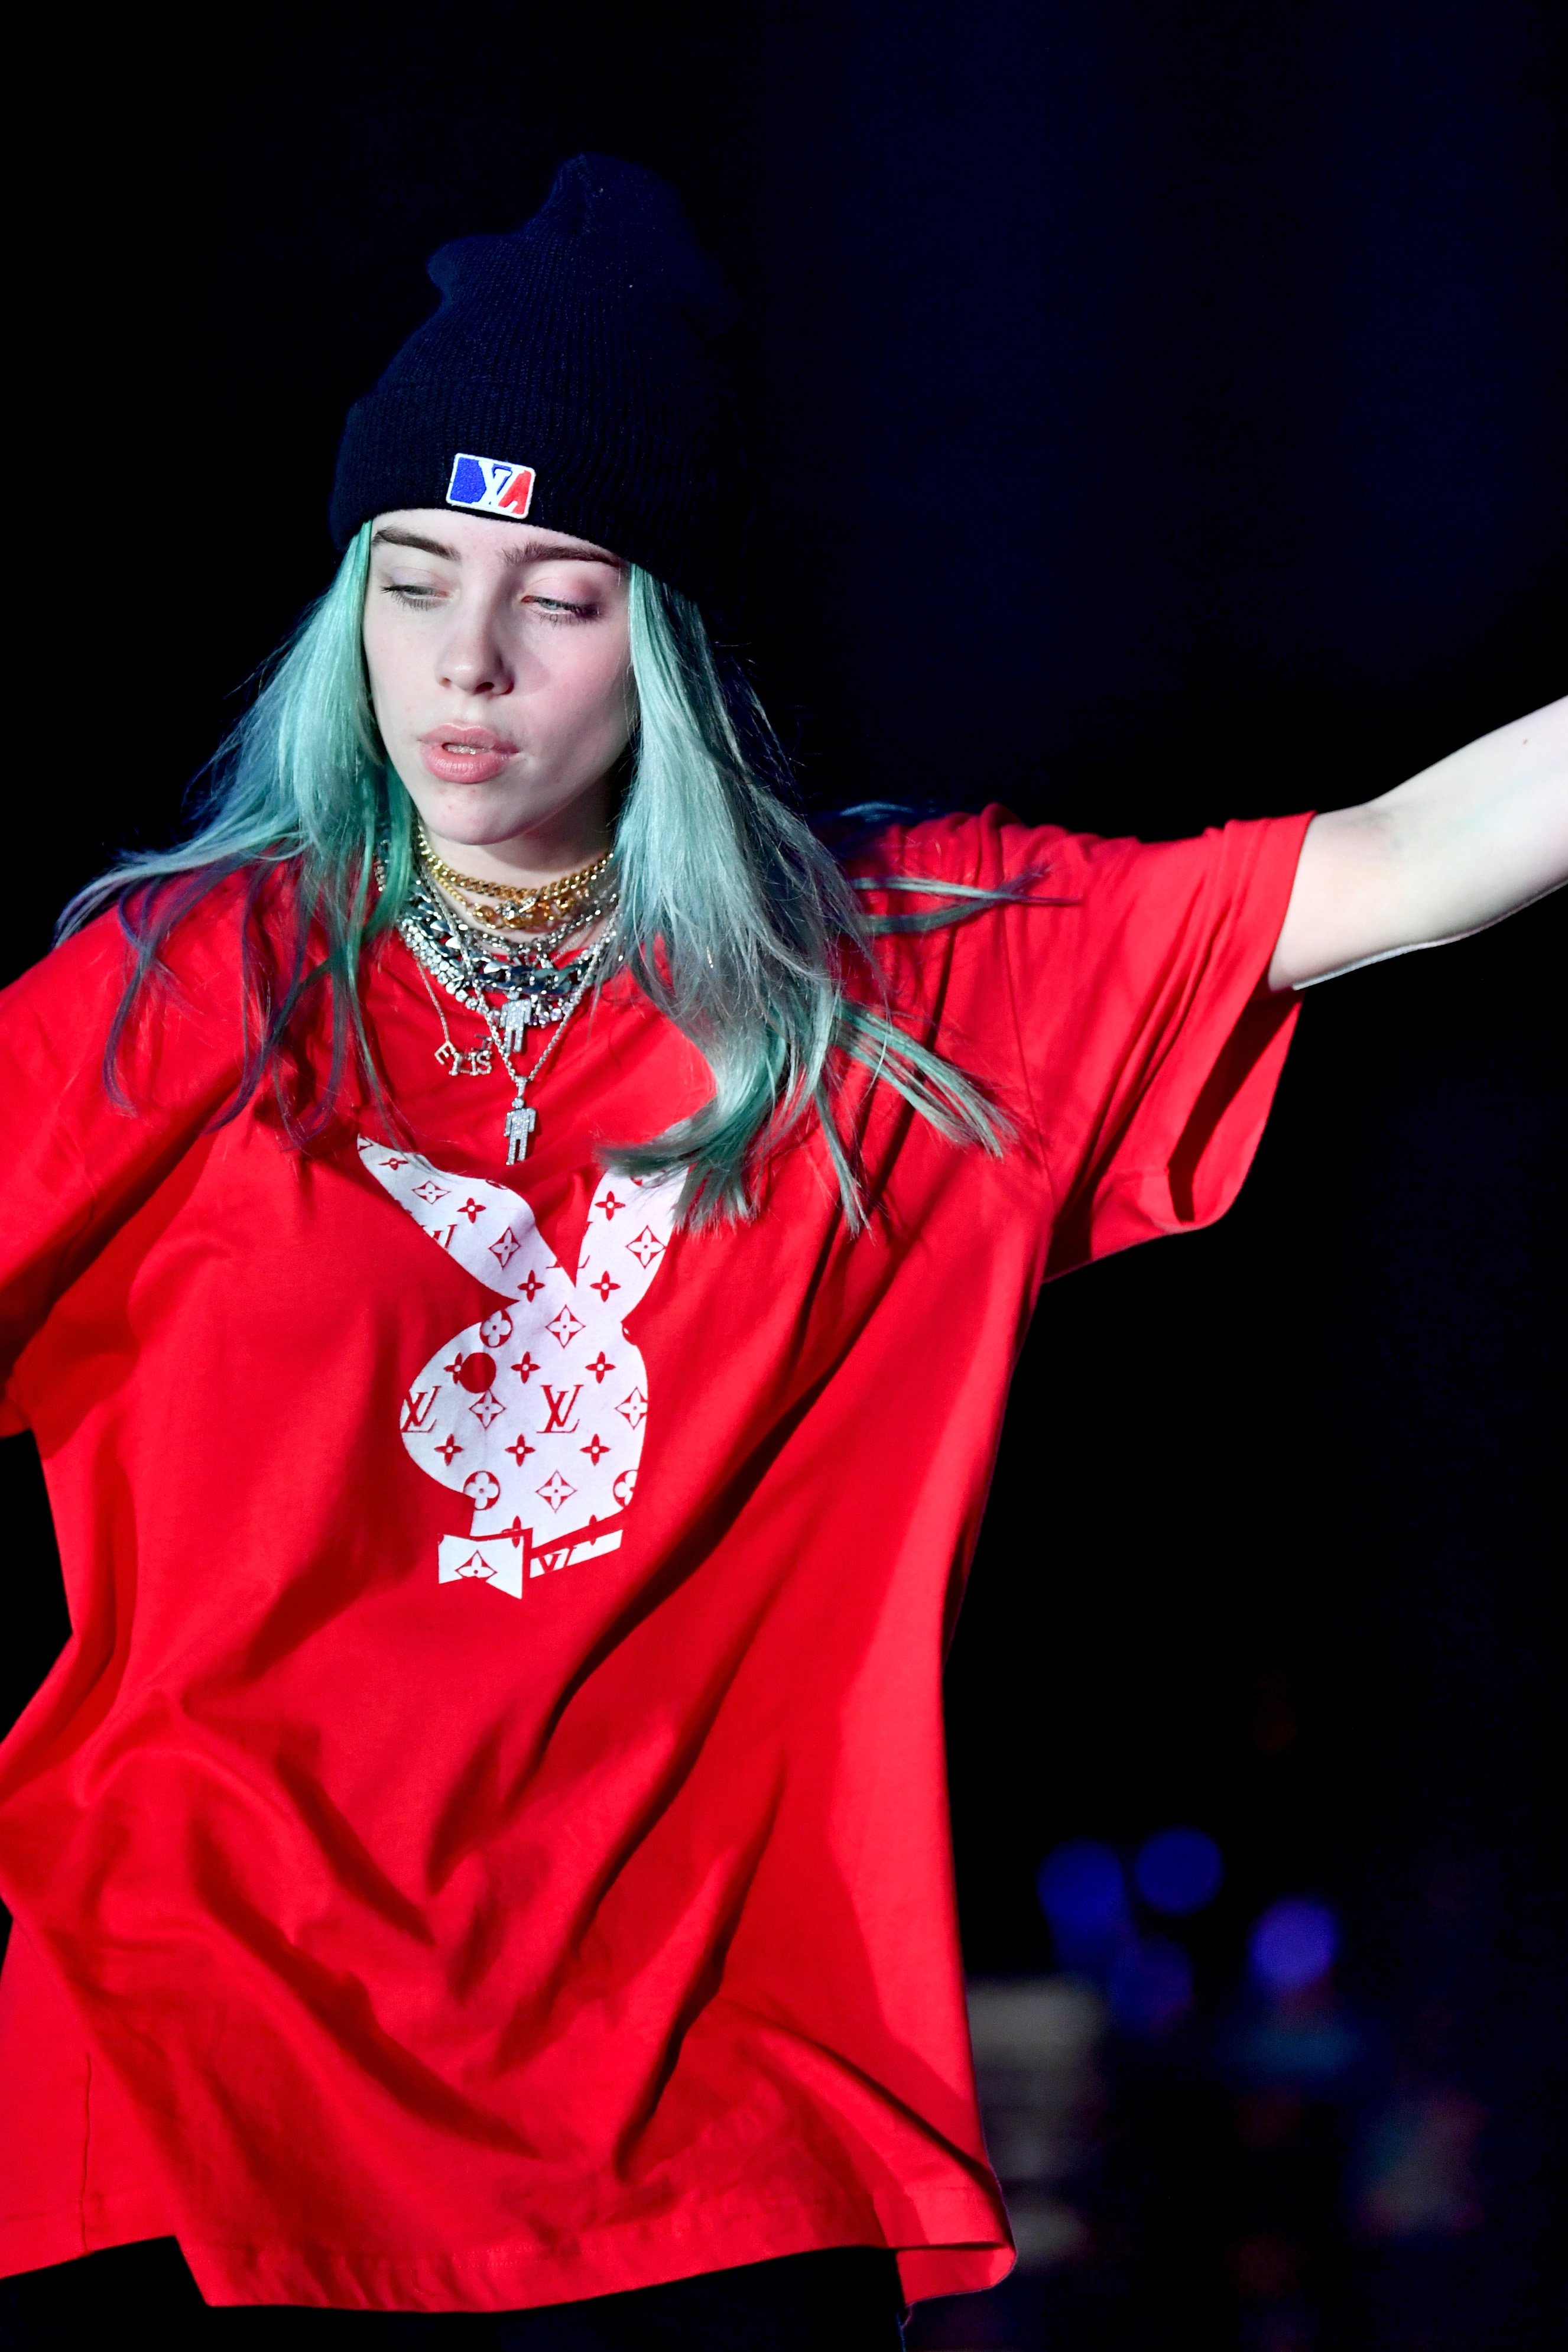 Billie Eilish Hates Her Blue Hair, But It's Not Going